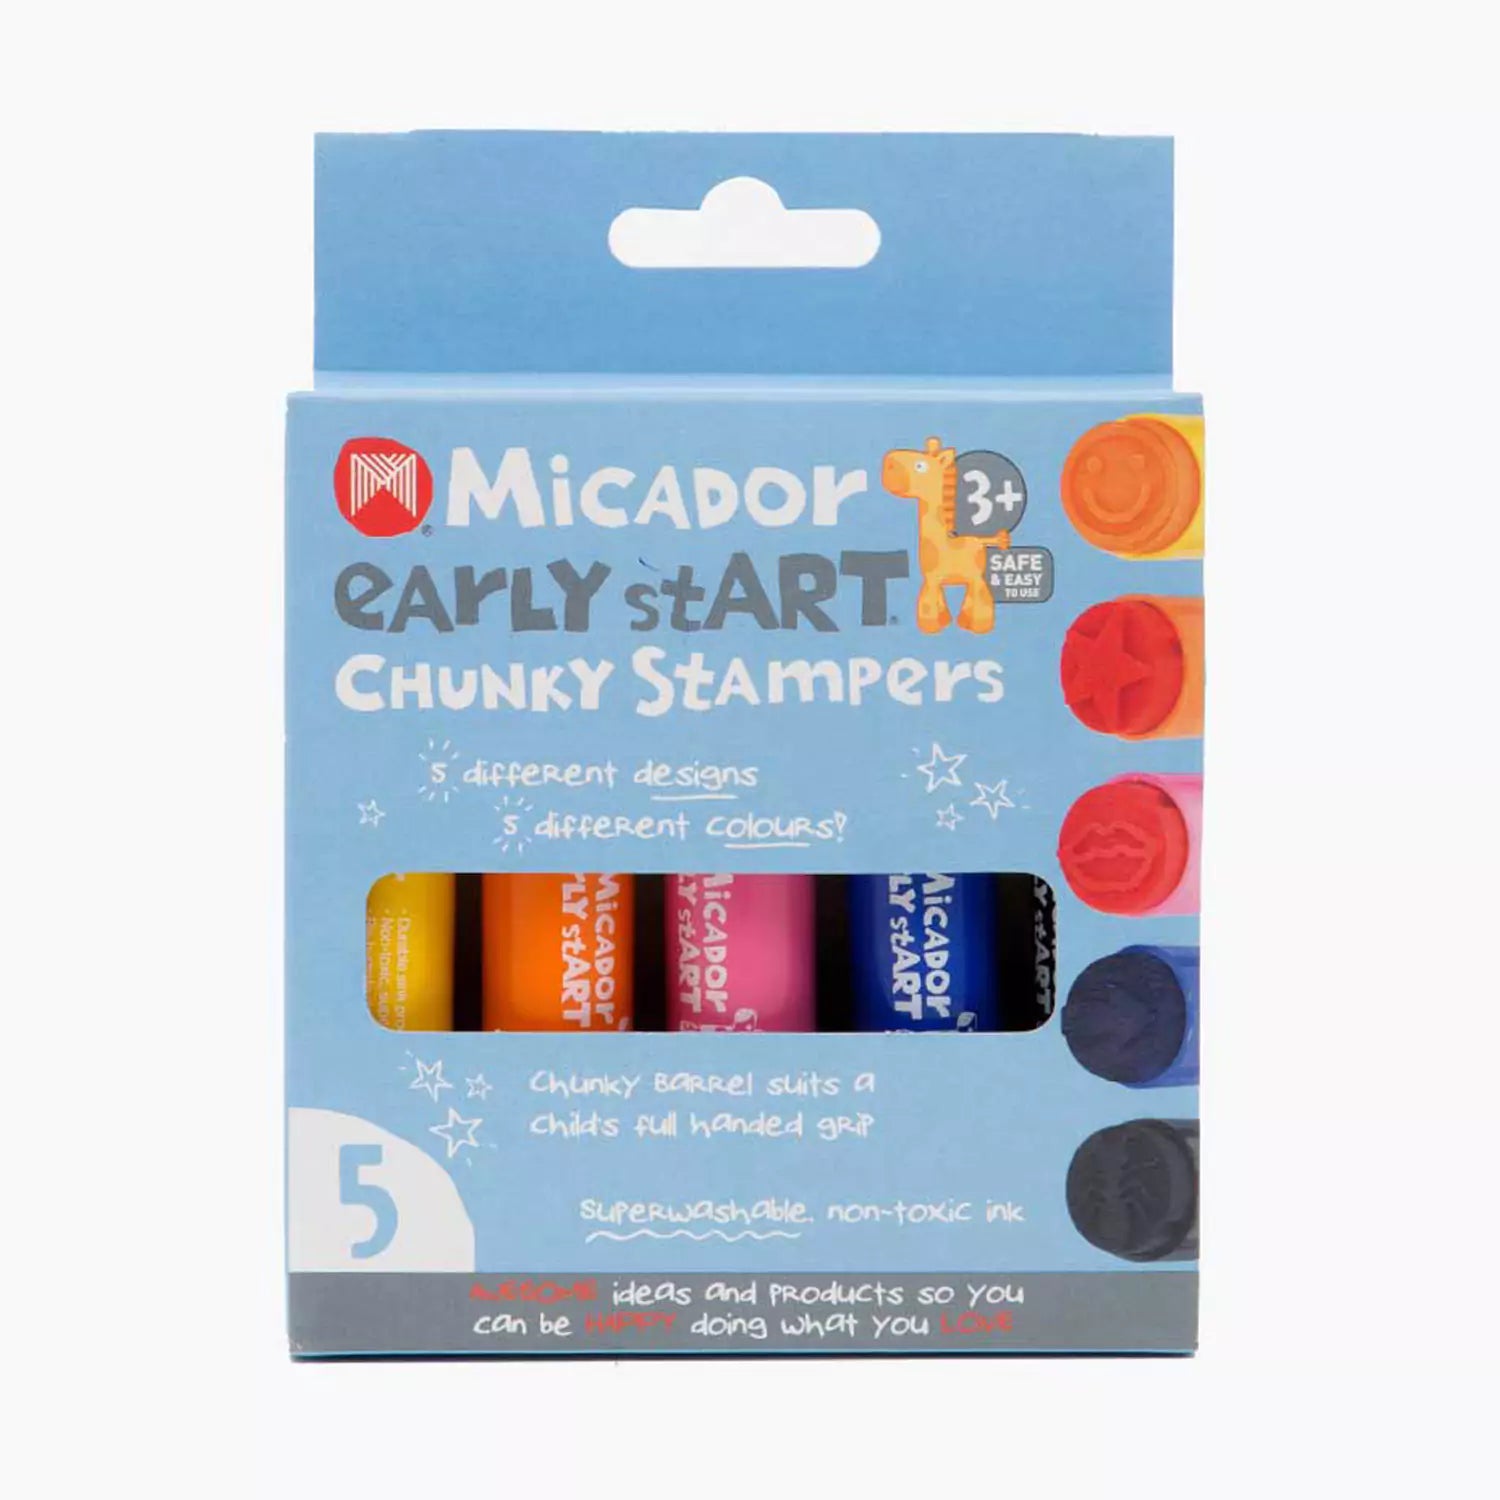 An image of Micador Chunky Stampers | Creative Fun for 3-Year-Olds